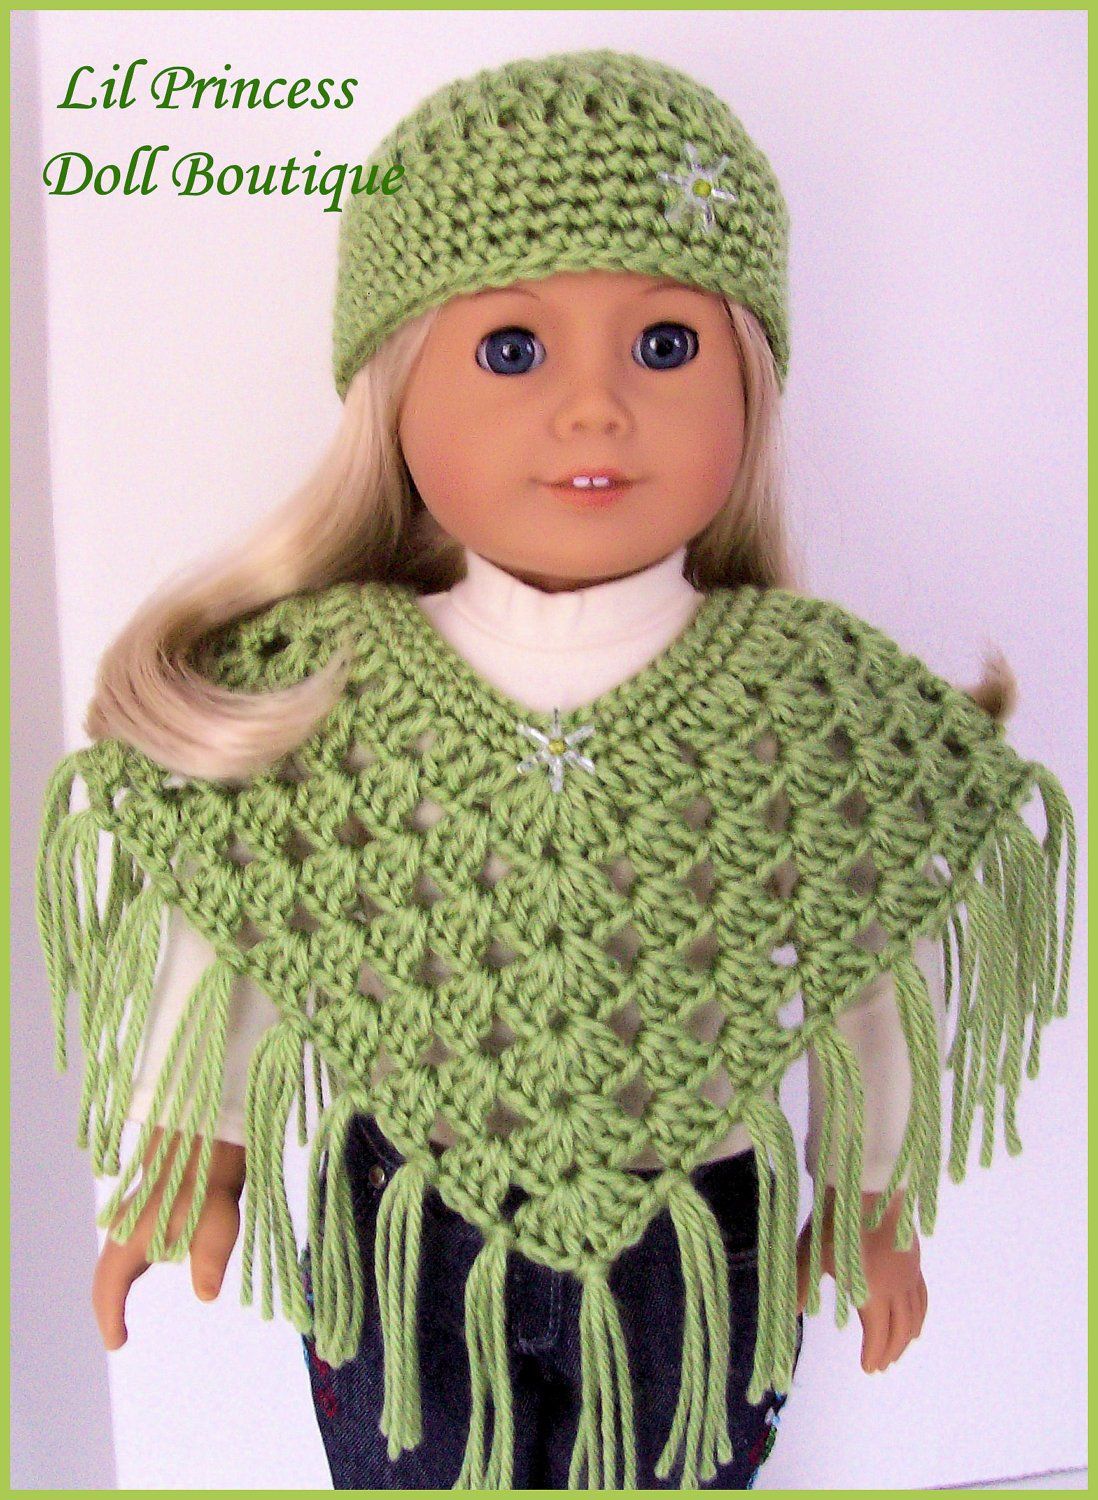 free download images nice doll knitting patterns clothes american girl ... - free download images nice doll knitting patterns clothes american girl ... -   American Girl Patterns